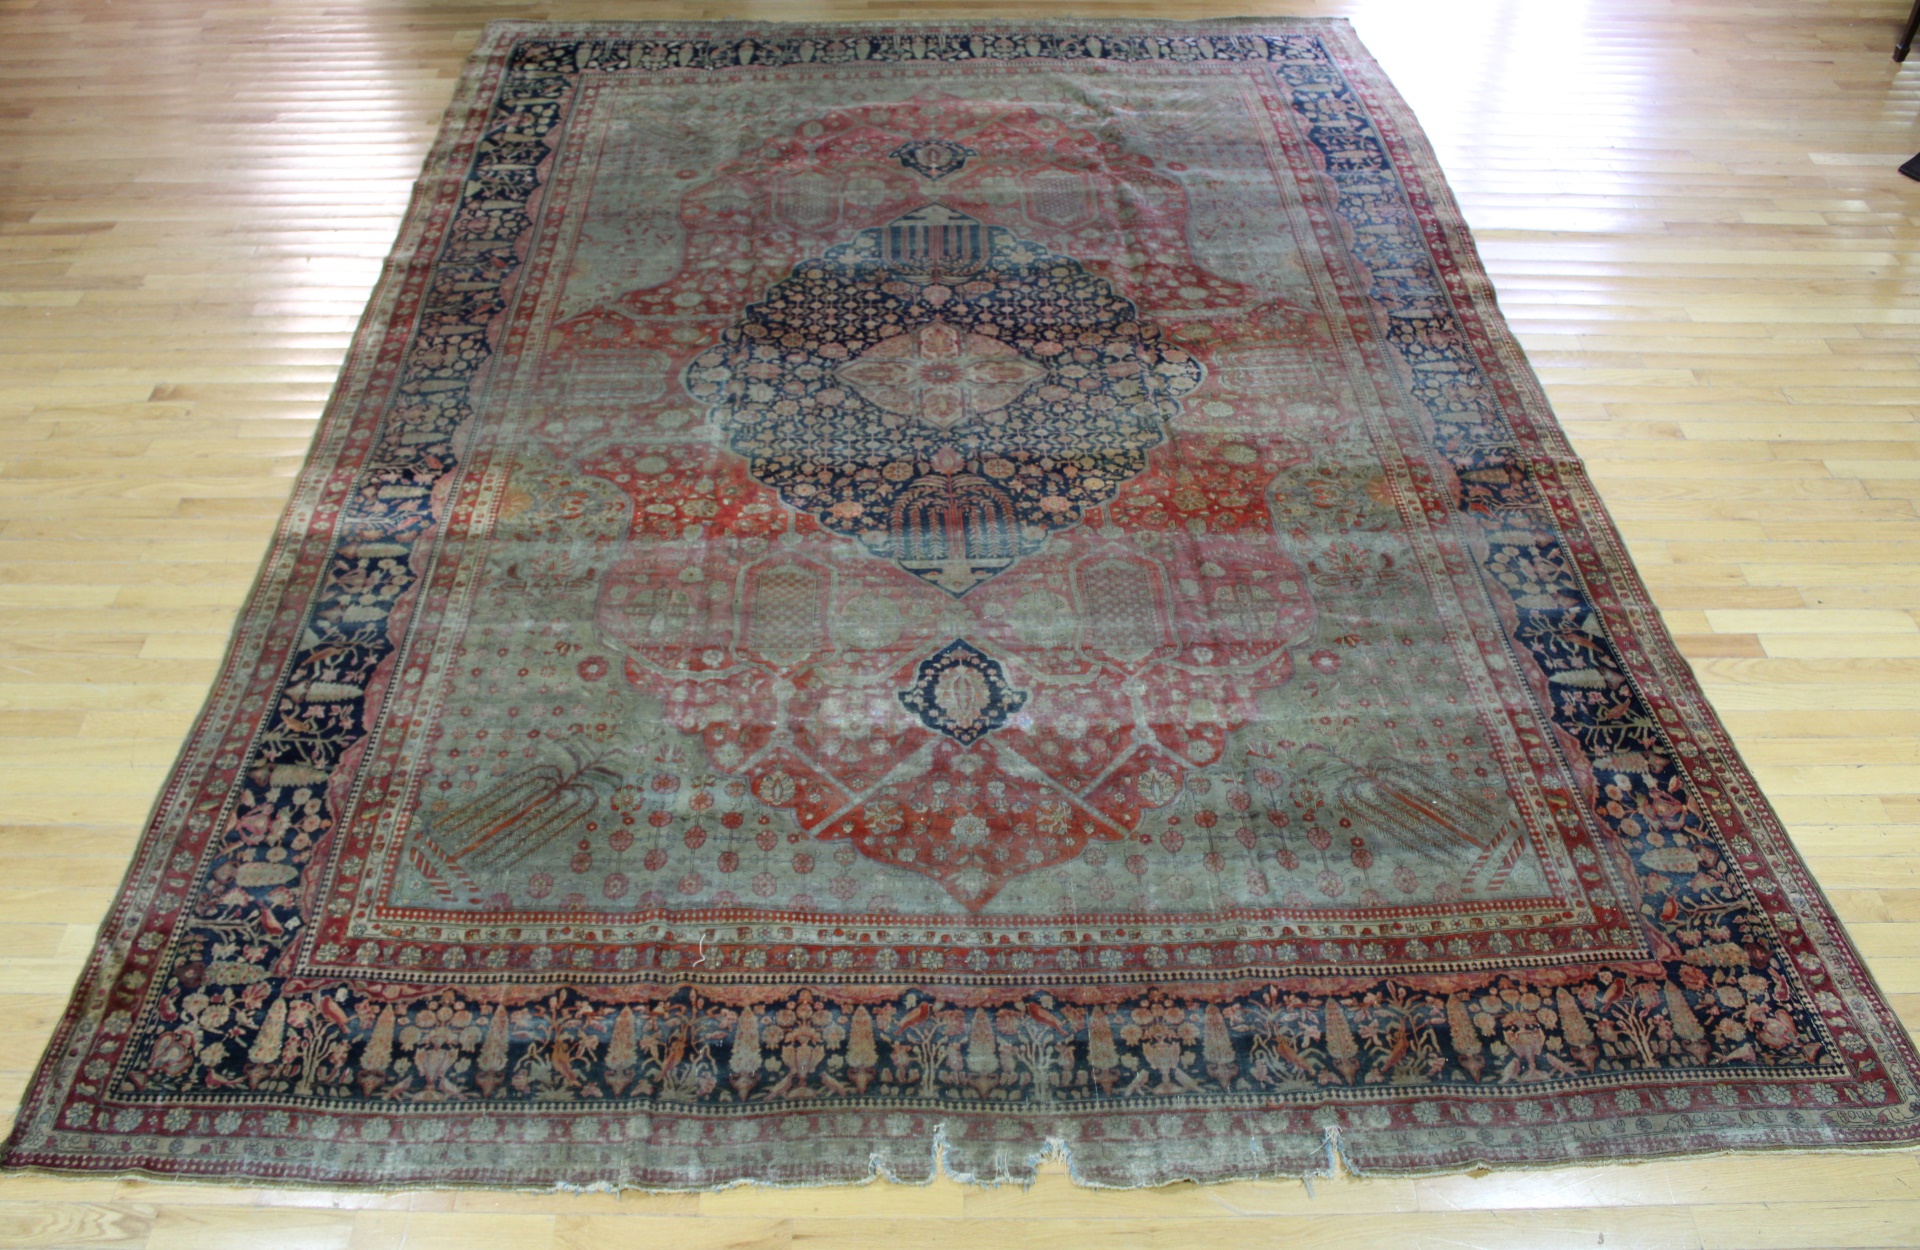 ANTIQUE AND FINELY HAND WOVEN KASHAN